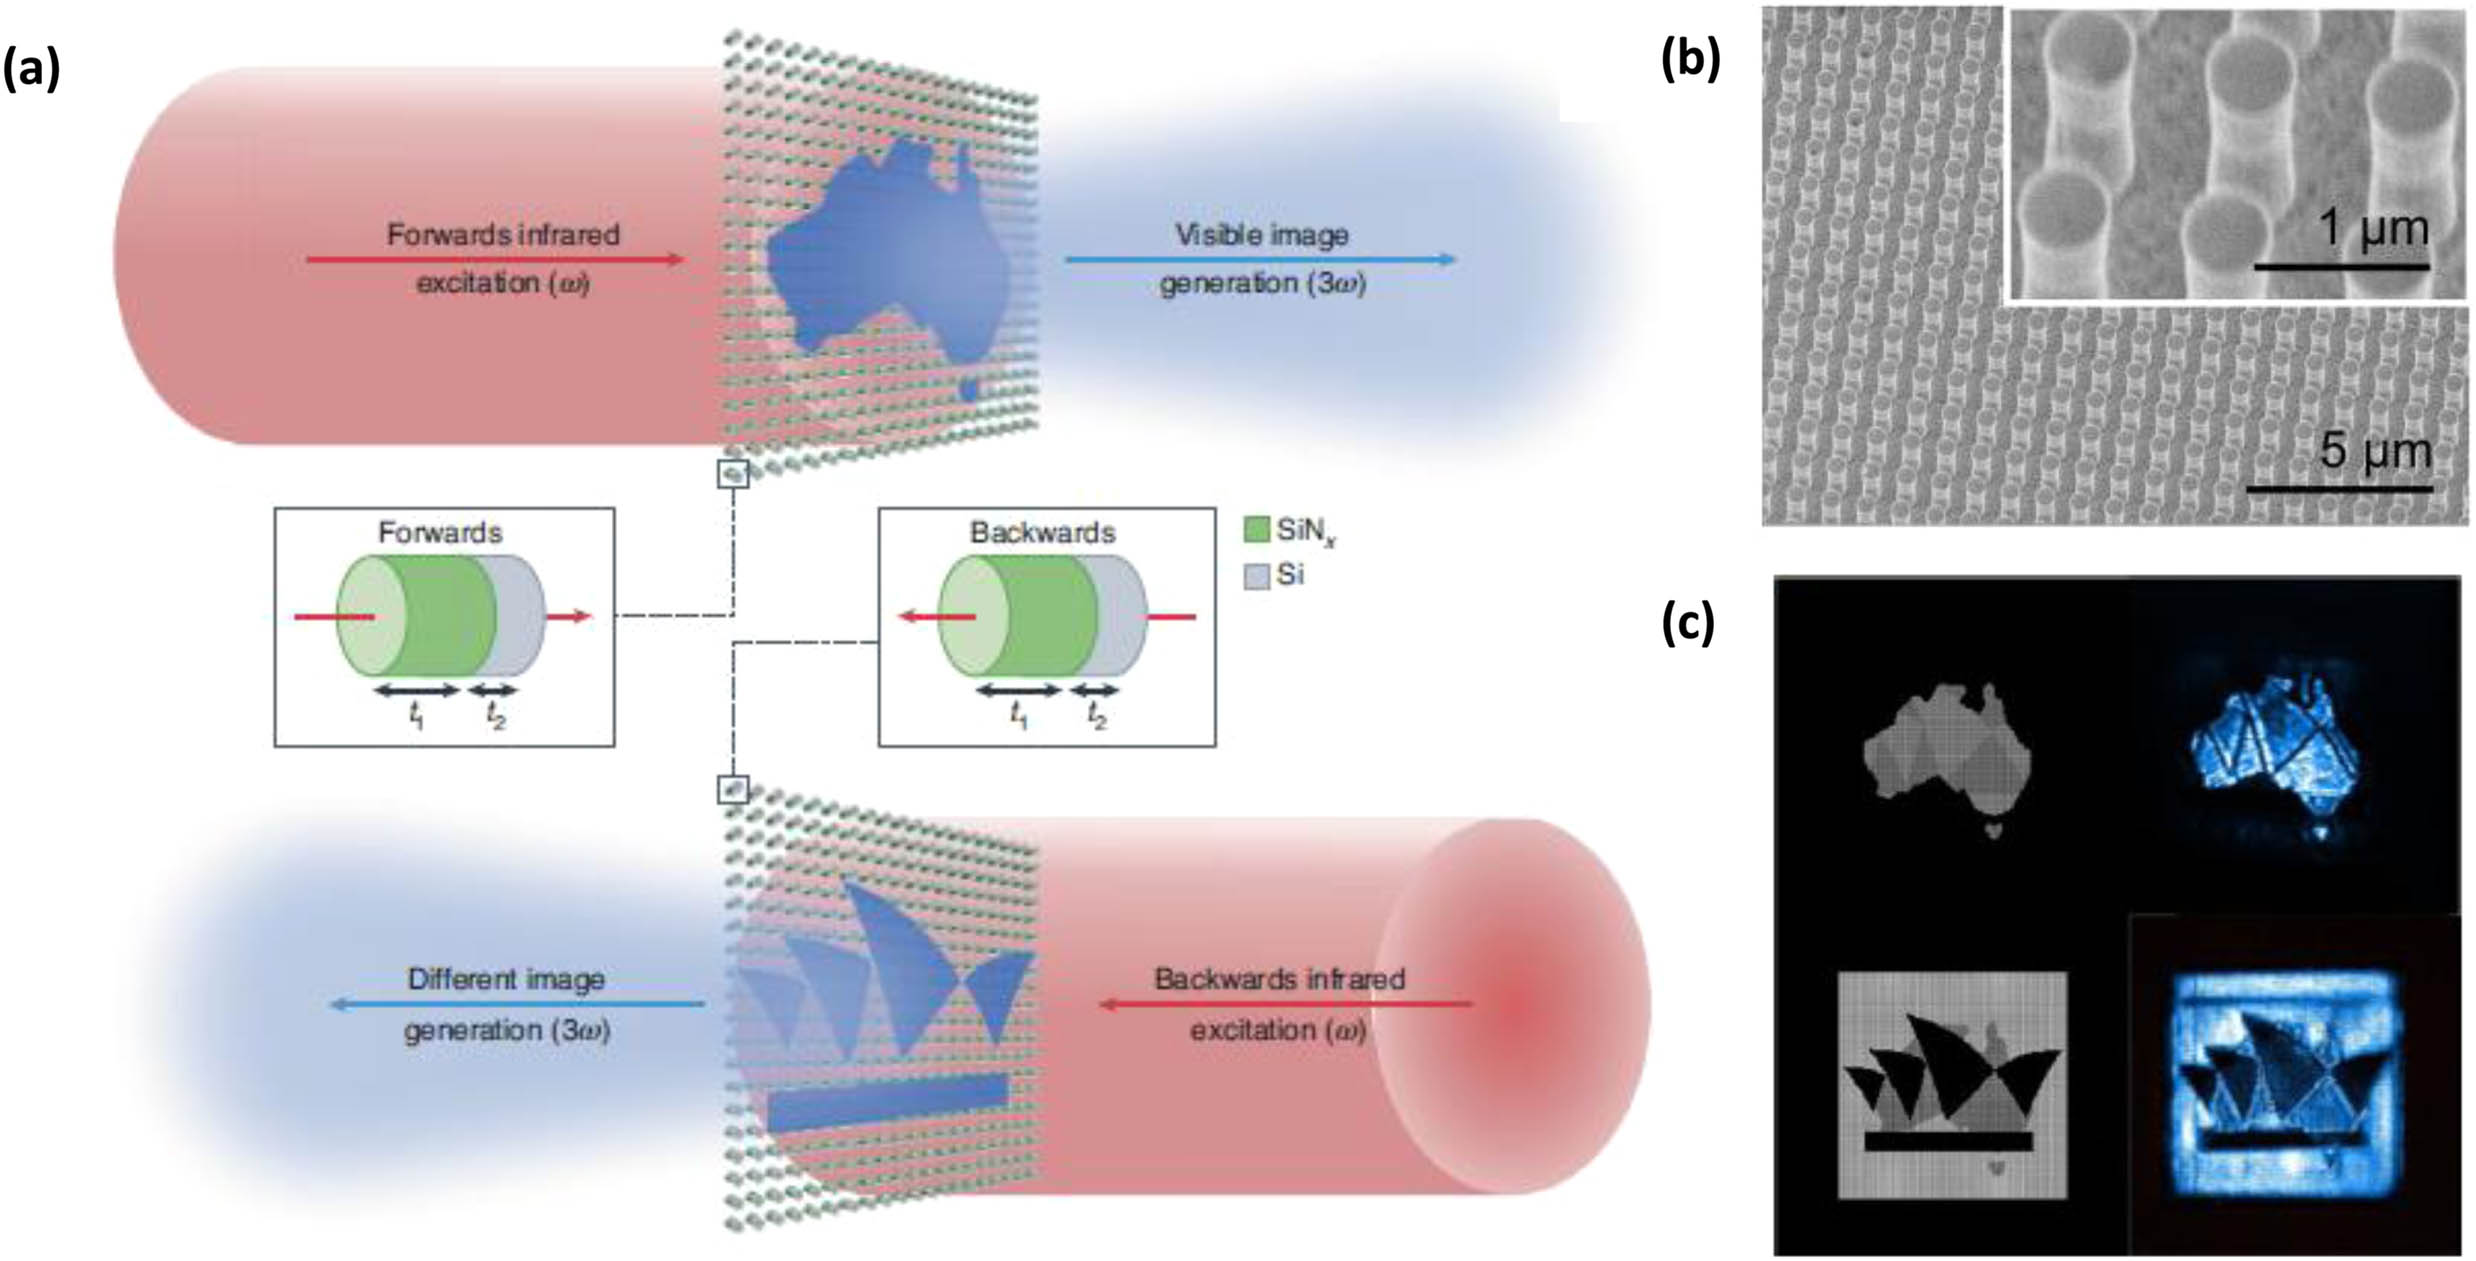 Asymmetric generation of third-harmonic images with nonlinear nonreciprocal metasurfaces. (a) Directional formation of images achieved at the third-harmonic-generation frequency by using nonlinear anisotropic dielectric metasurfaces with asymmetric geometry and strong magneto-optical coupling [110]. The unit cell is composed of subwavelength nanoresonators based on silicon nitride and amorphous silicon. (b) Experimental realization of the bilayer metasurface: scanning electron microscopy image of the sample, before its embedding into the homogeneous environment. (c) Experimental results. Nonlinear optical response detected in transmission at the third-harmonic frequency for forward and backward excitation at a wavelength of 1475 nm. Each experimental image is assigned its own individual minimum and maximum levels of camera counts. Adapted from Ref. [103]. Copyright 2022 Springer Nature Ltd.